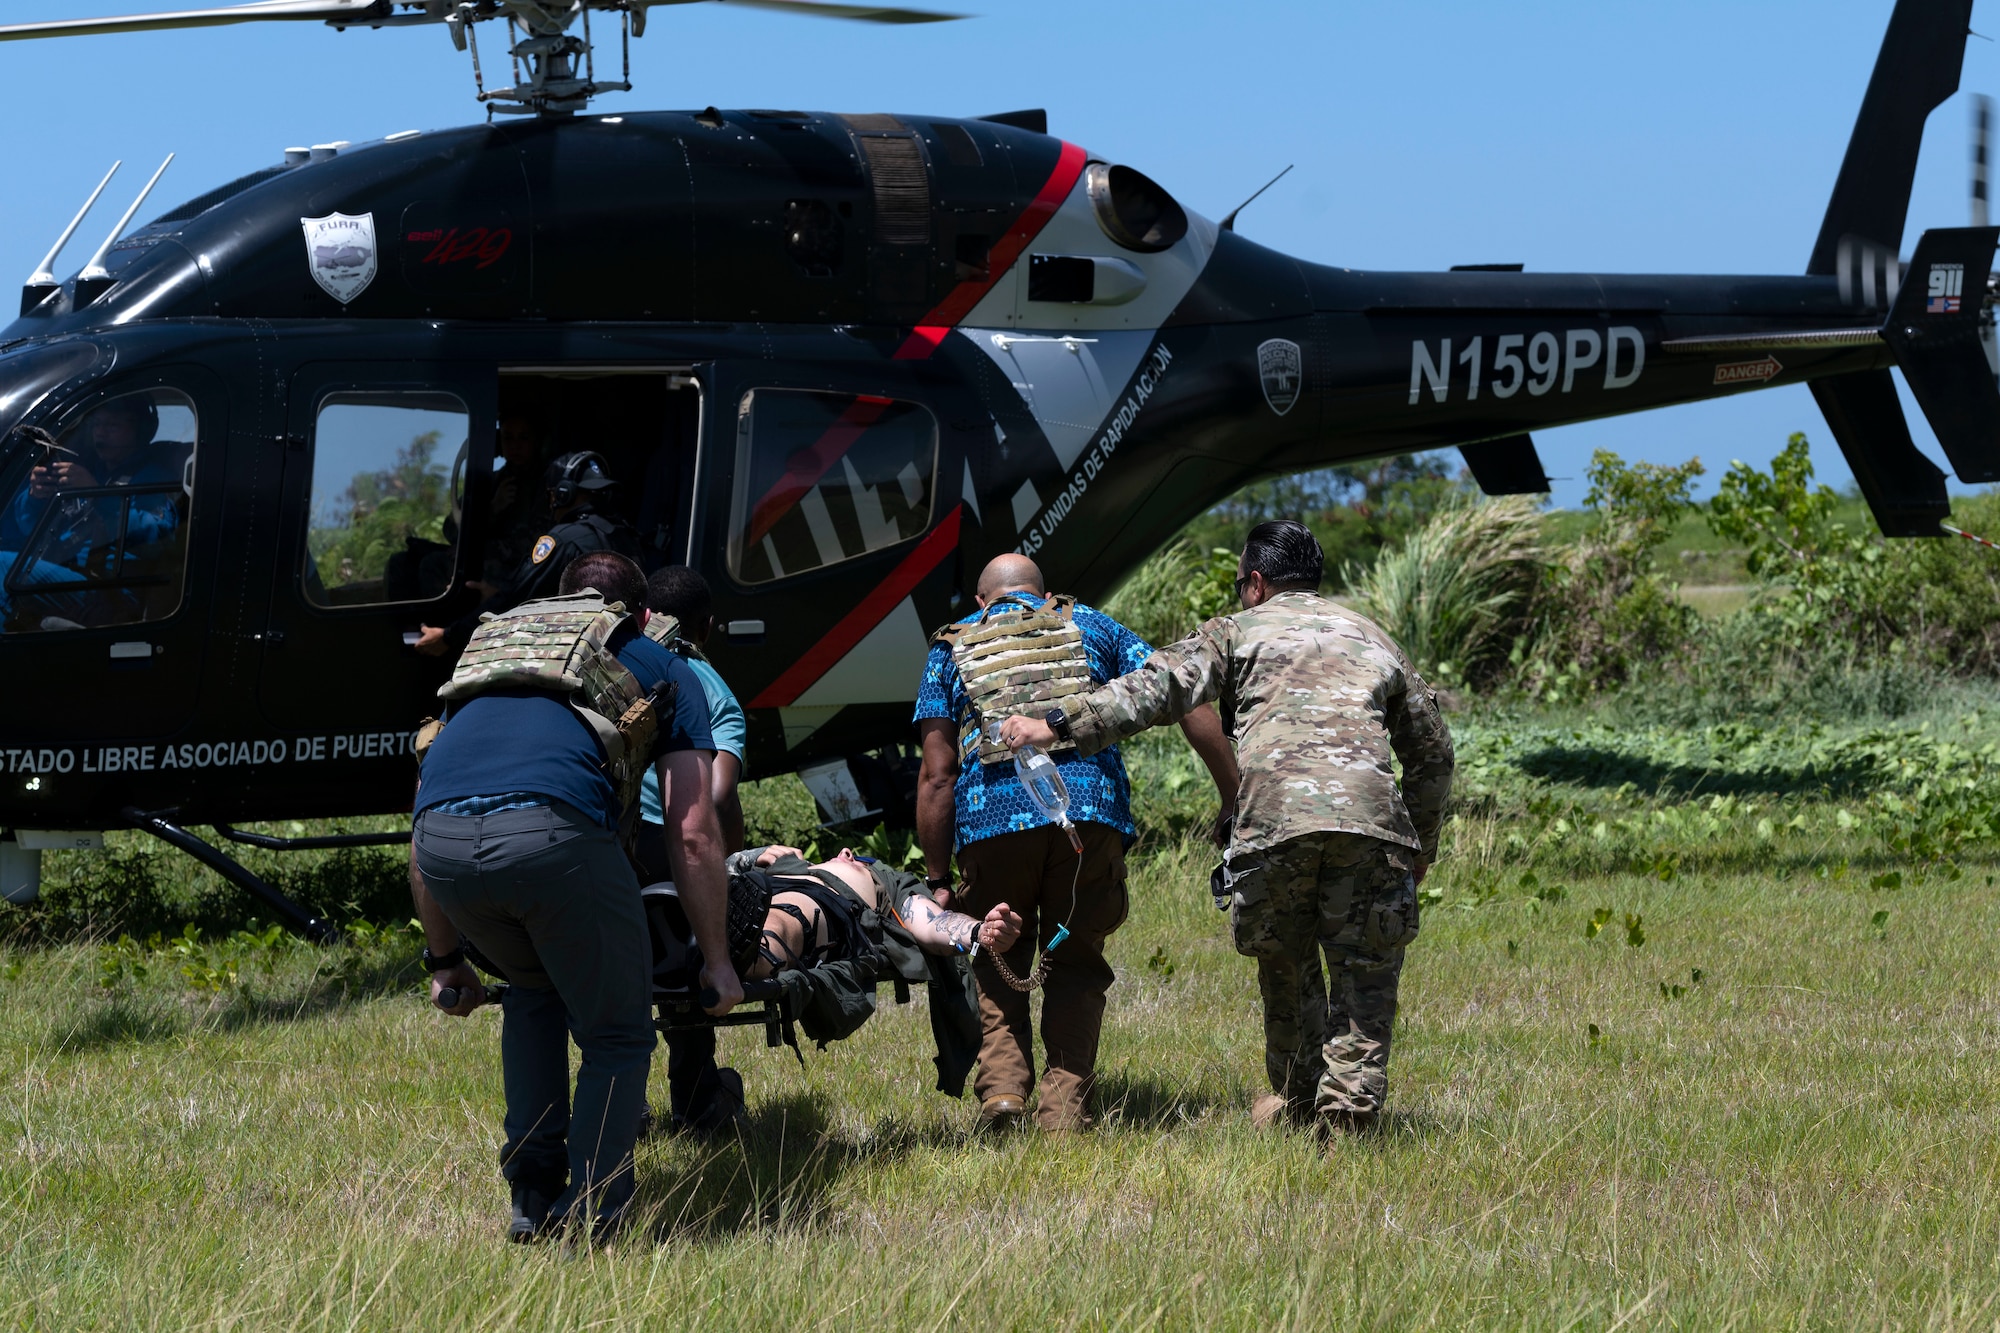 U.S. Air Force Senior Airman Ben Leveillee, a survival, evasion, resistance and escape specialist assigned to the 60th Operations Support Squadron, is transported onto a Puerto Rico Police Department, Fuerzas Unidas de Rápida Acción Bell 429 helicopter during the Advisor Edge exercise at Roosevelt Roads, Ceiba, Puerto Rico, June 8, 2023. Advisor Edge was a multi-unit exercise with the integration of government agencies, where participant units tested air advising skills and strengthened partnerships through unique challenges, allowing burden sharing in combat with partner nations. (U.S. Air National Guard photo by Master Sgt. Rafael D. Rosa)